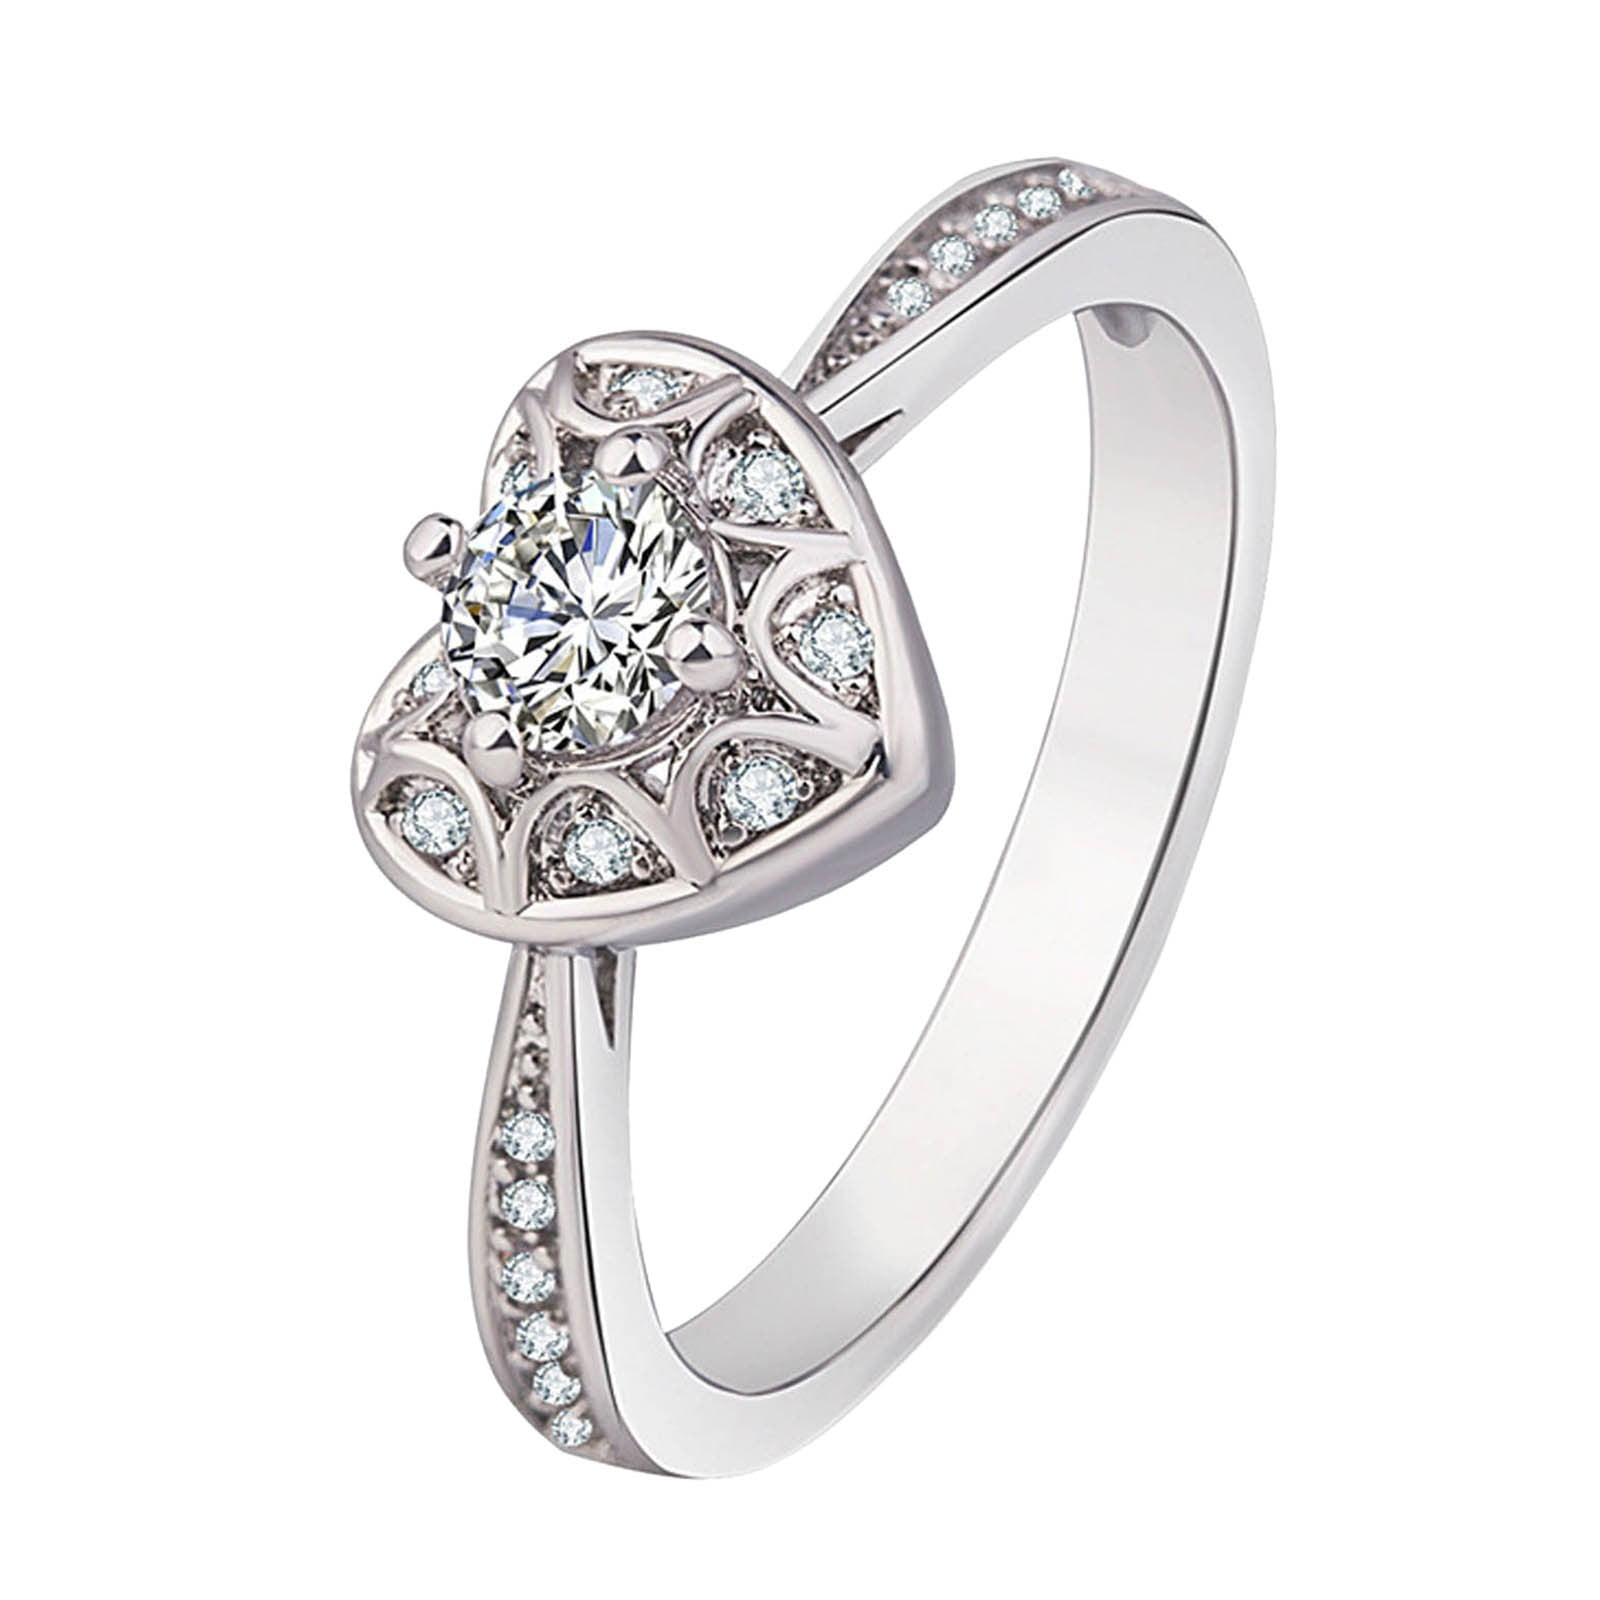 Buy Platinum Rings For Girls Designs Online in India | Candere by Kalyan  Jewellers